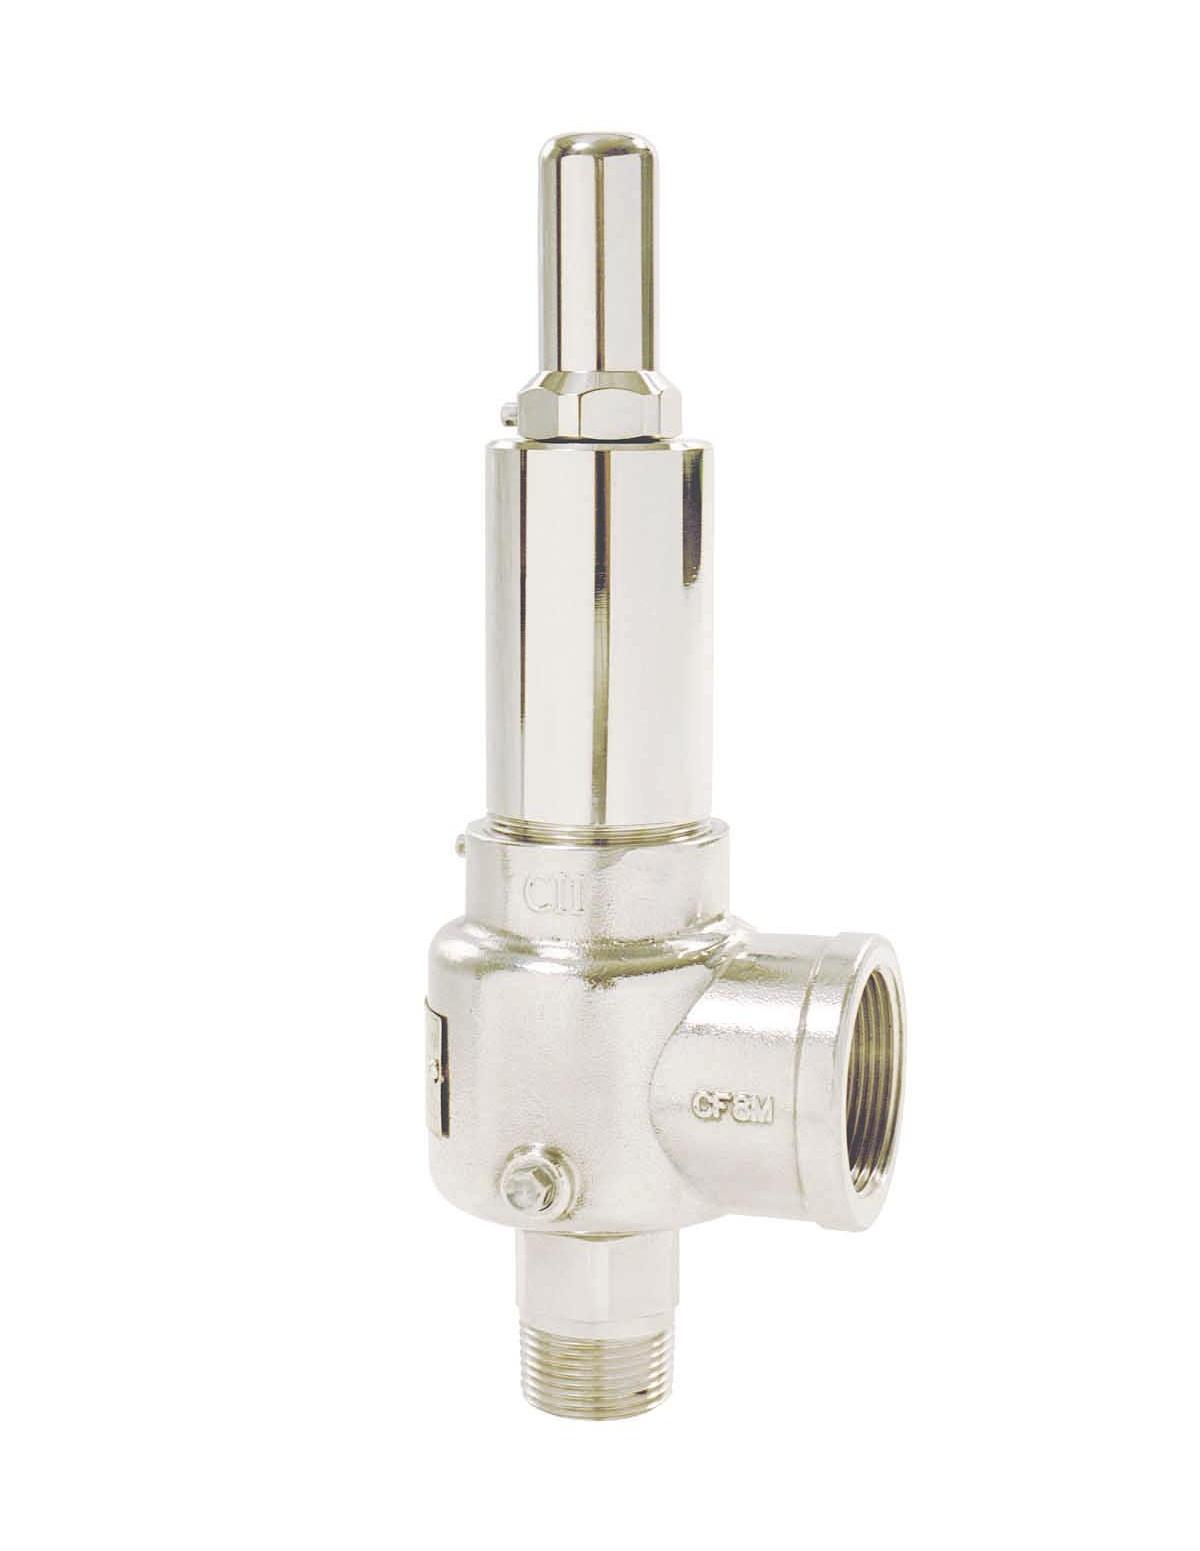 Relief Valve, E Orifice, 3/4 Inch Size, Stainless Steel